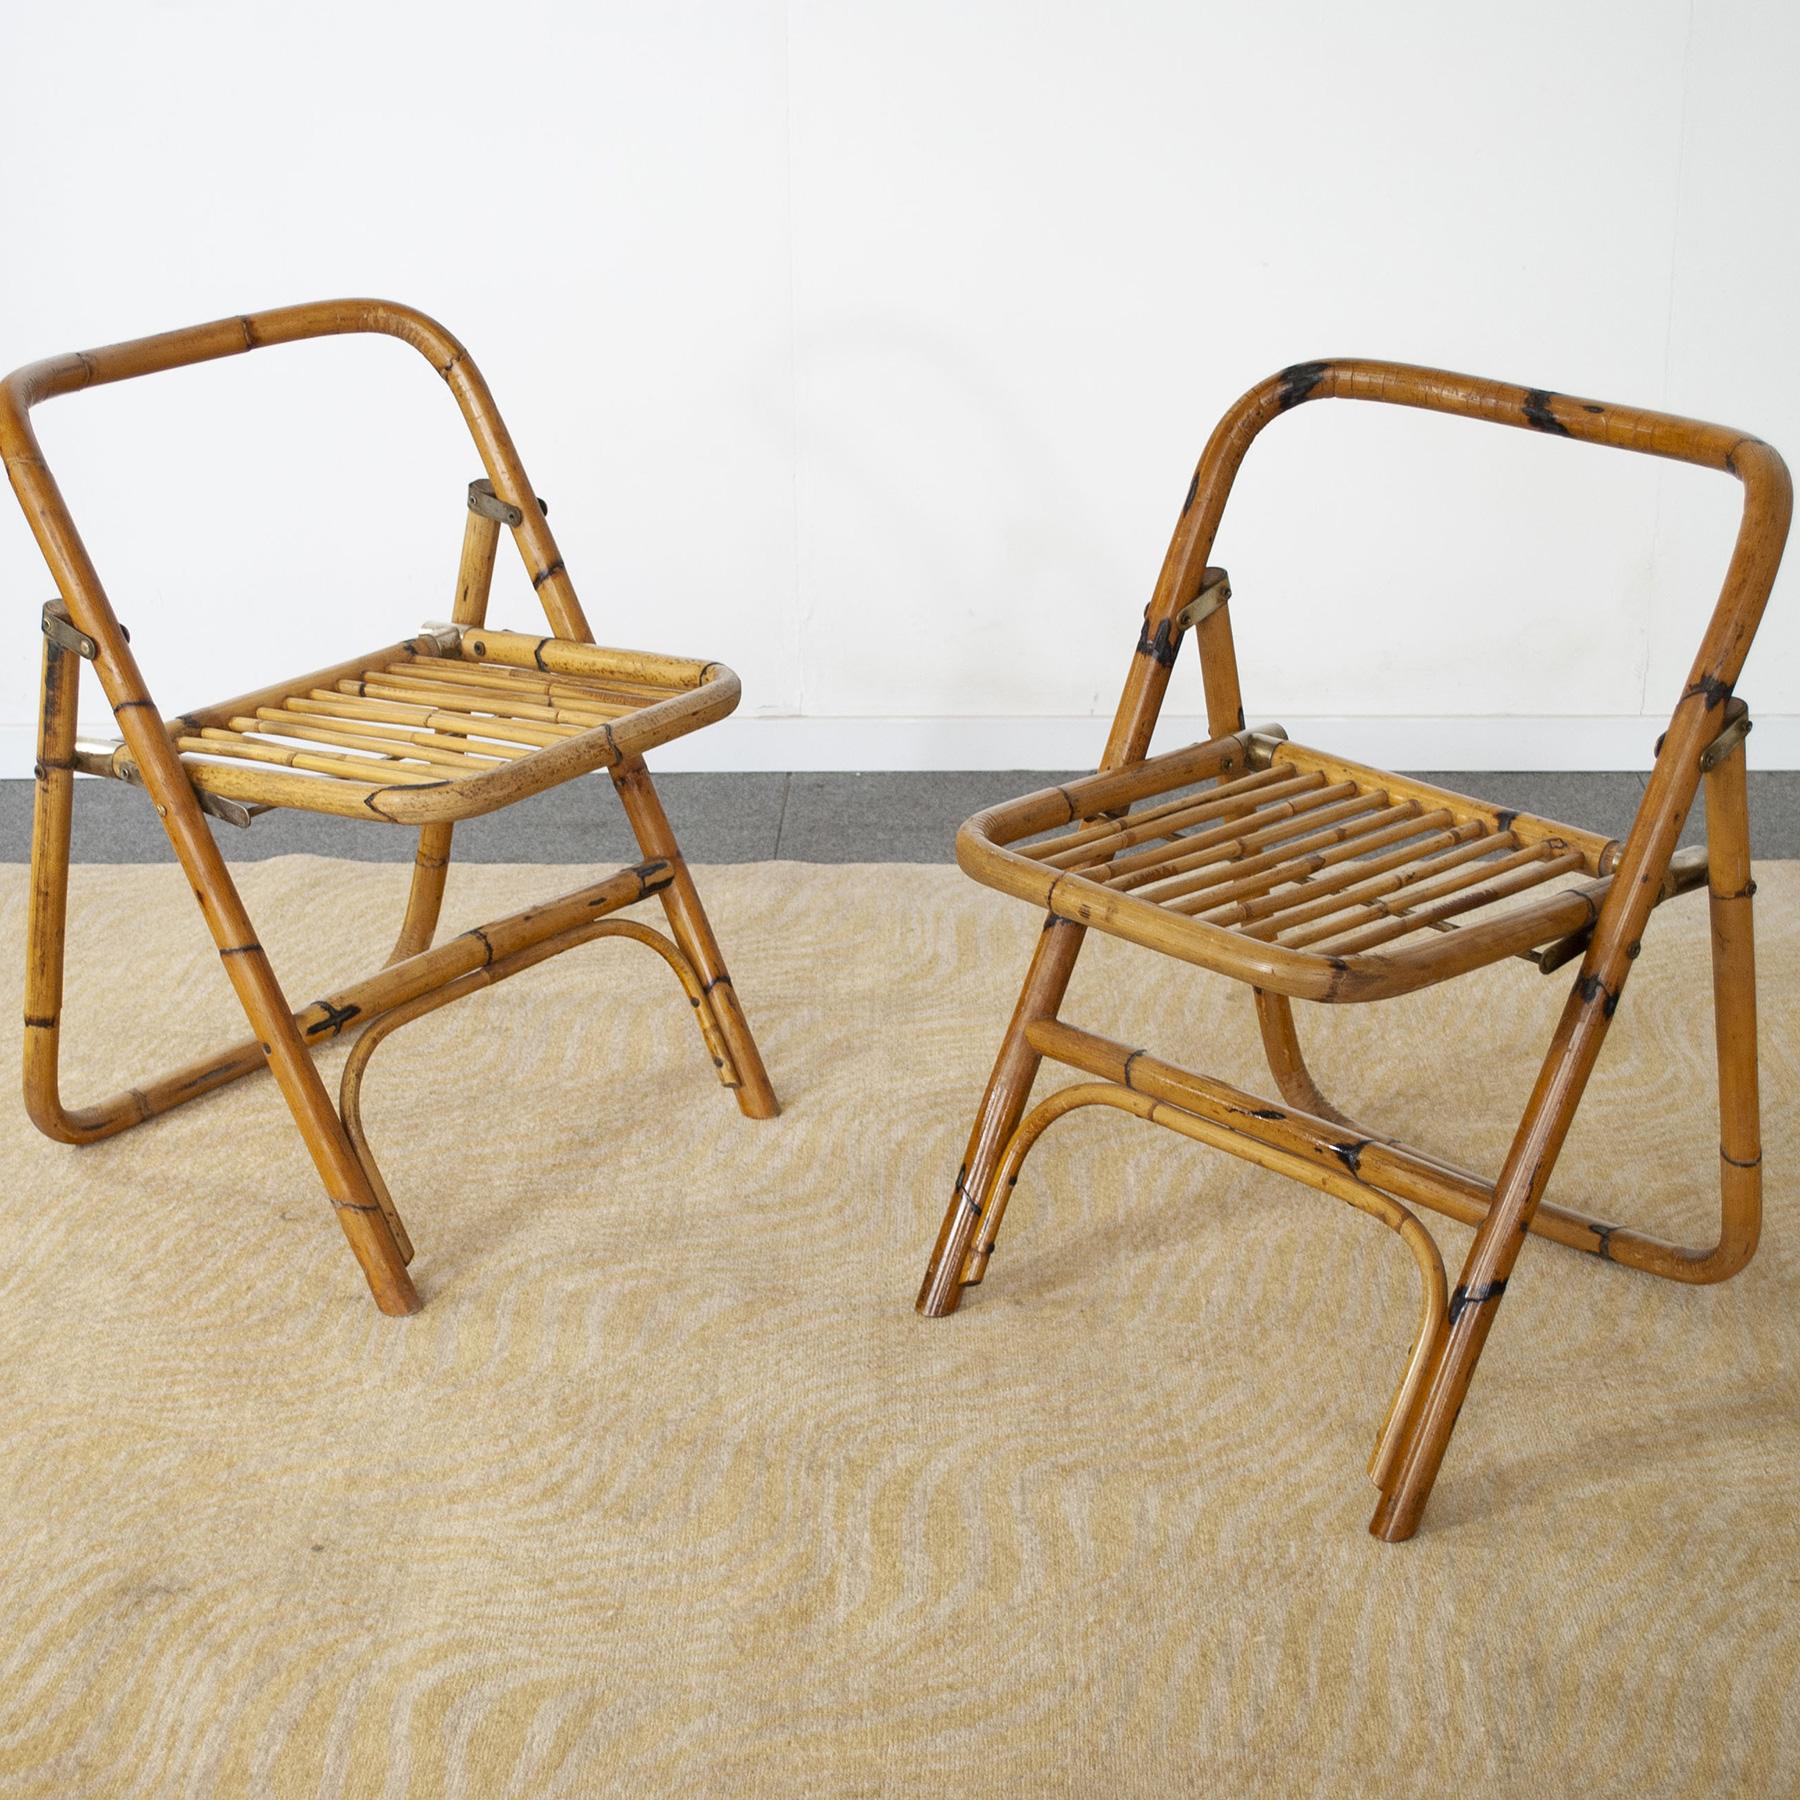 Set of two italian bamboo folding chairs very confortable, embellished with brass hinges and rods produced by Dal Vera mid 60s.
 